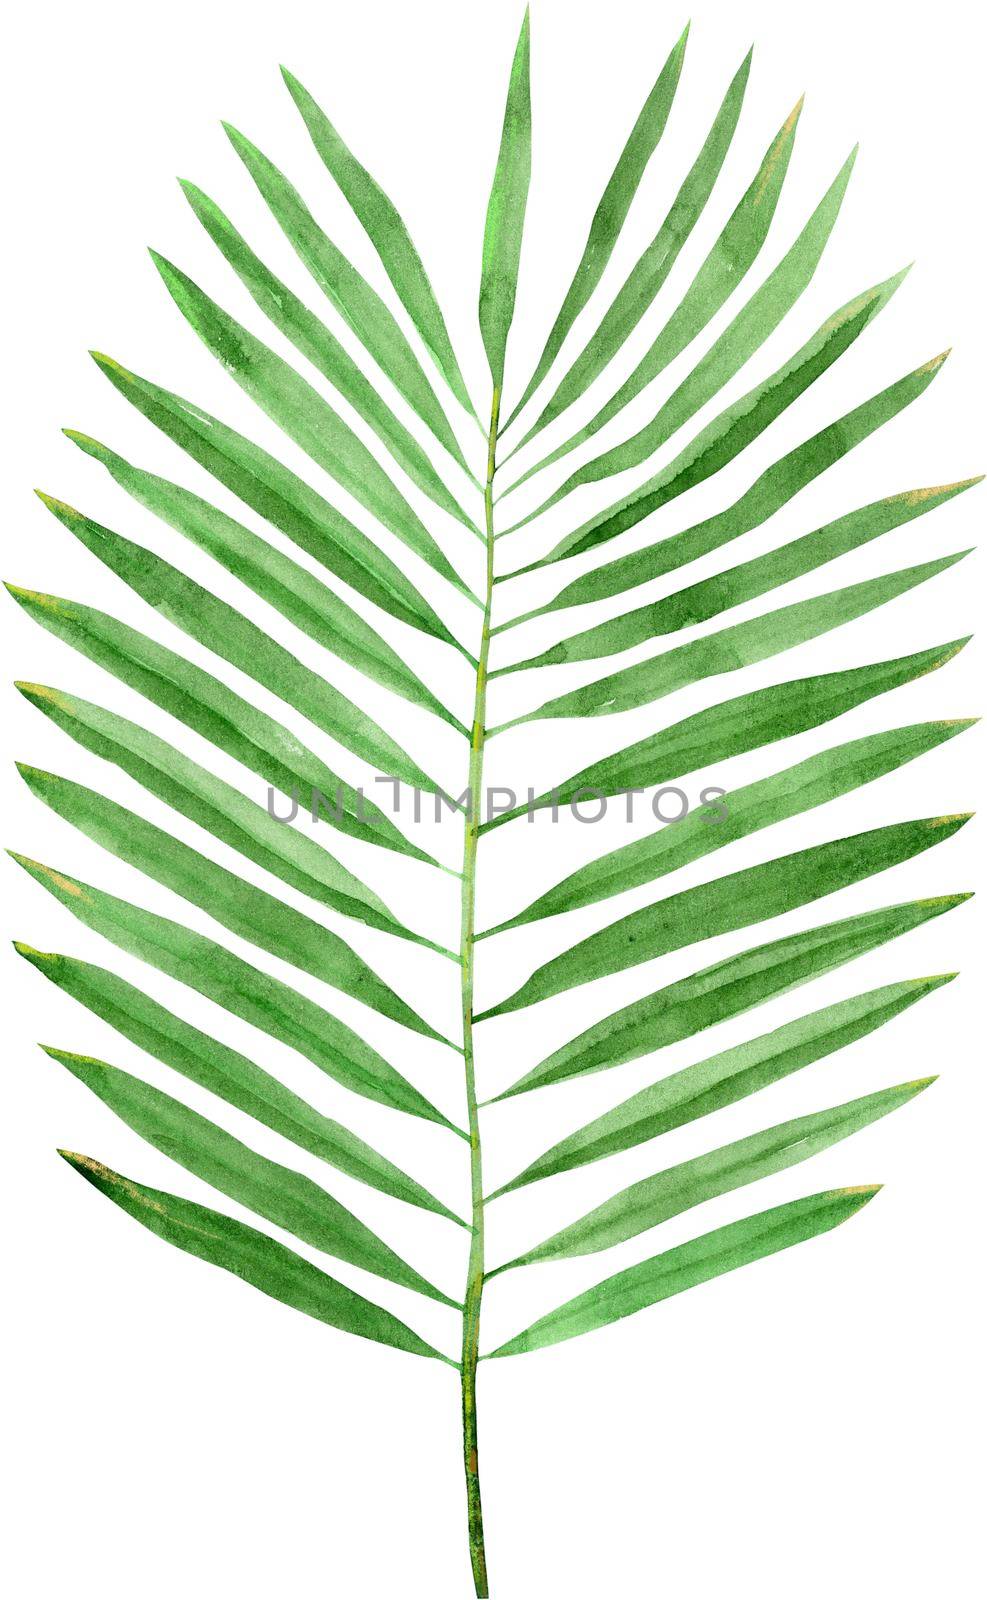 Green leaves of palm robillini tree isolated on white background by NataOmsk